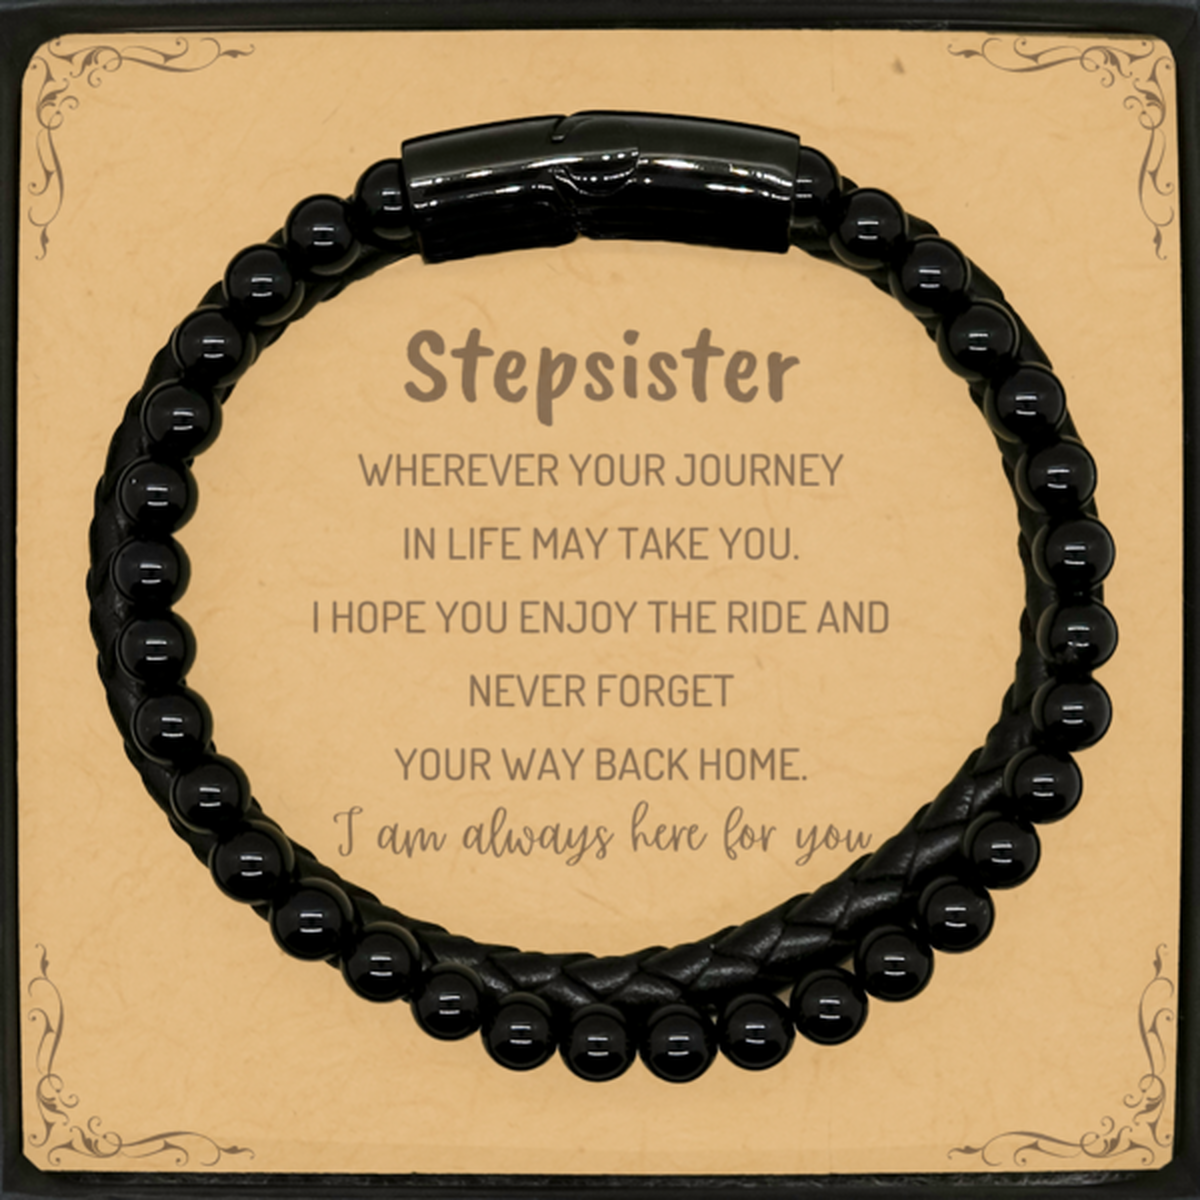 Stepsister wherever your journey in life may take you, I am always here for you Stepsister Stone Leather Bracelets, Awesome Christmas Gifts For Stepsister Message Card, Stepsister Birthday Gifts for Men Women Family Loved One